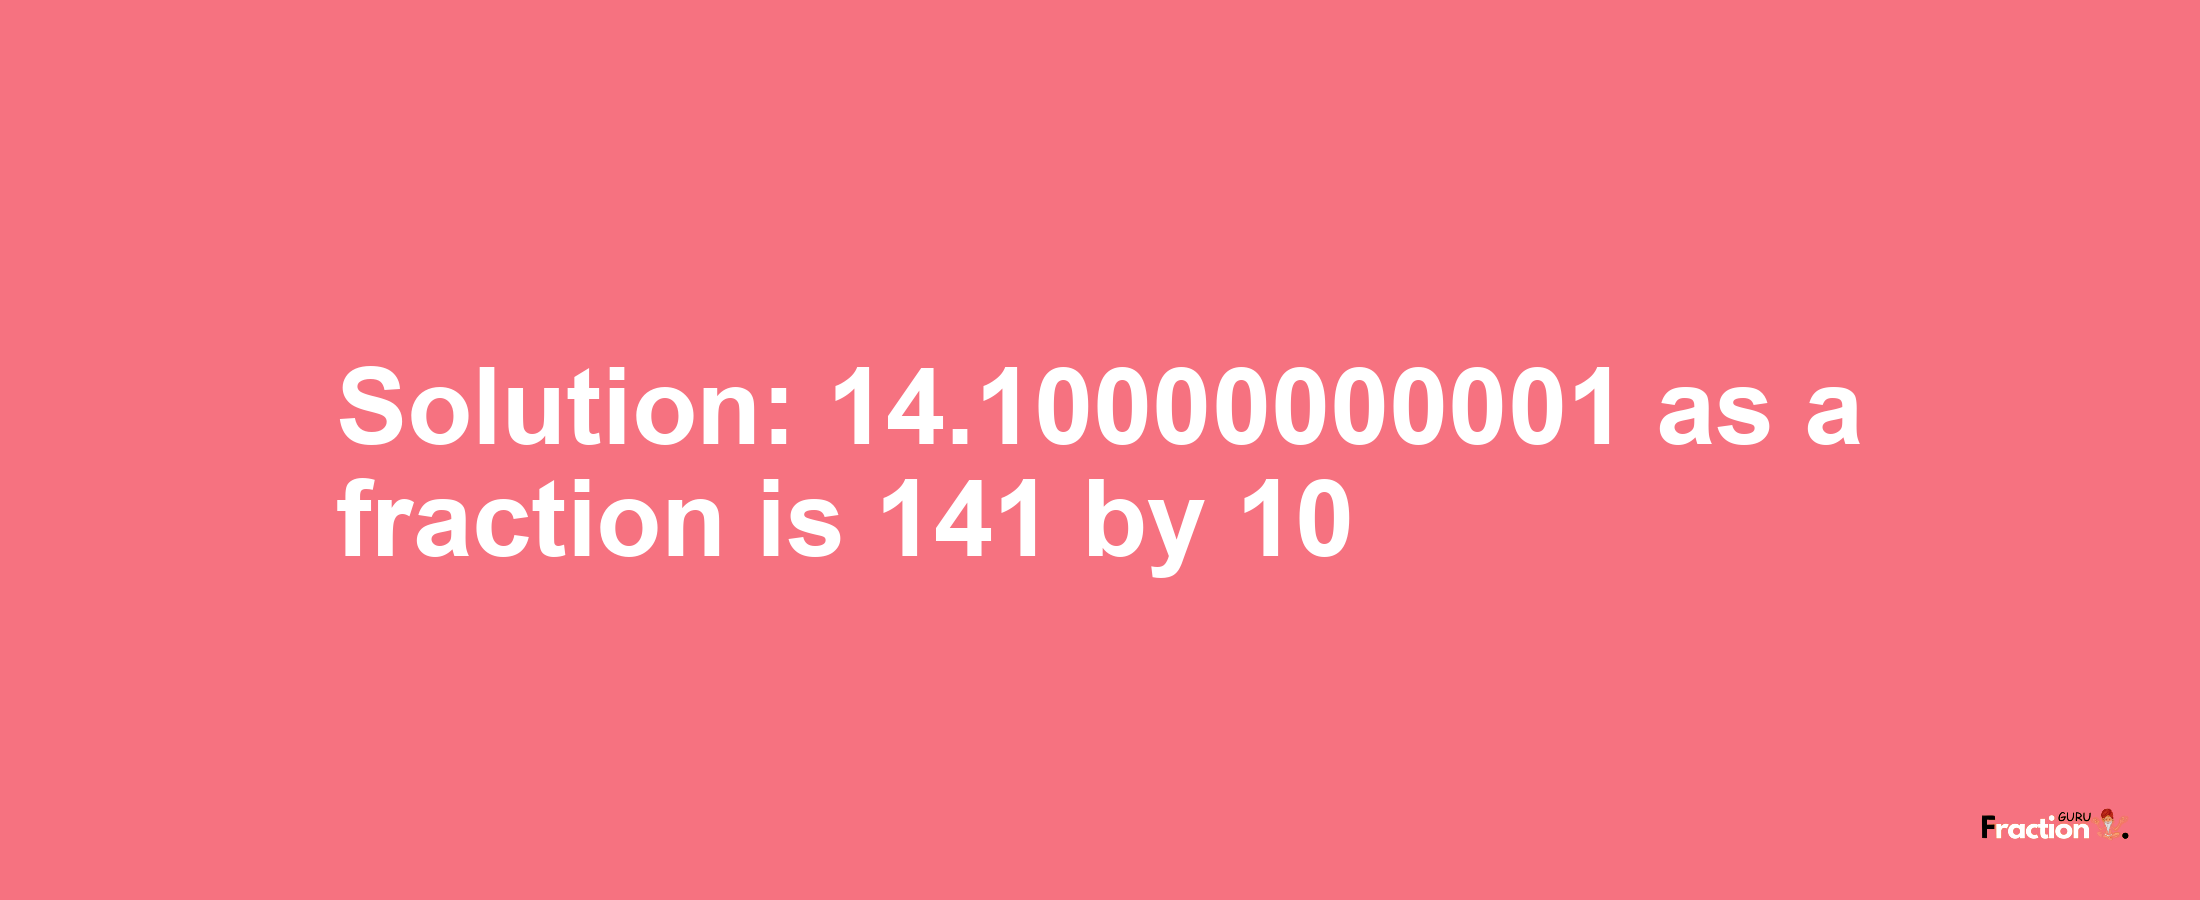 Solution:14.10000000001 as a fraction is 141/10